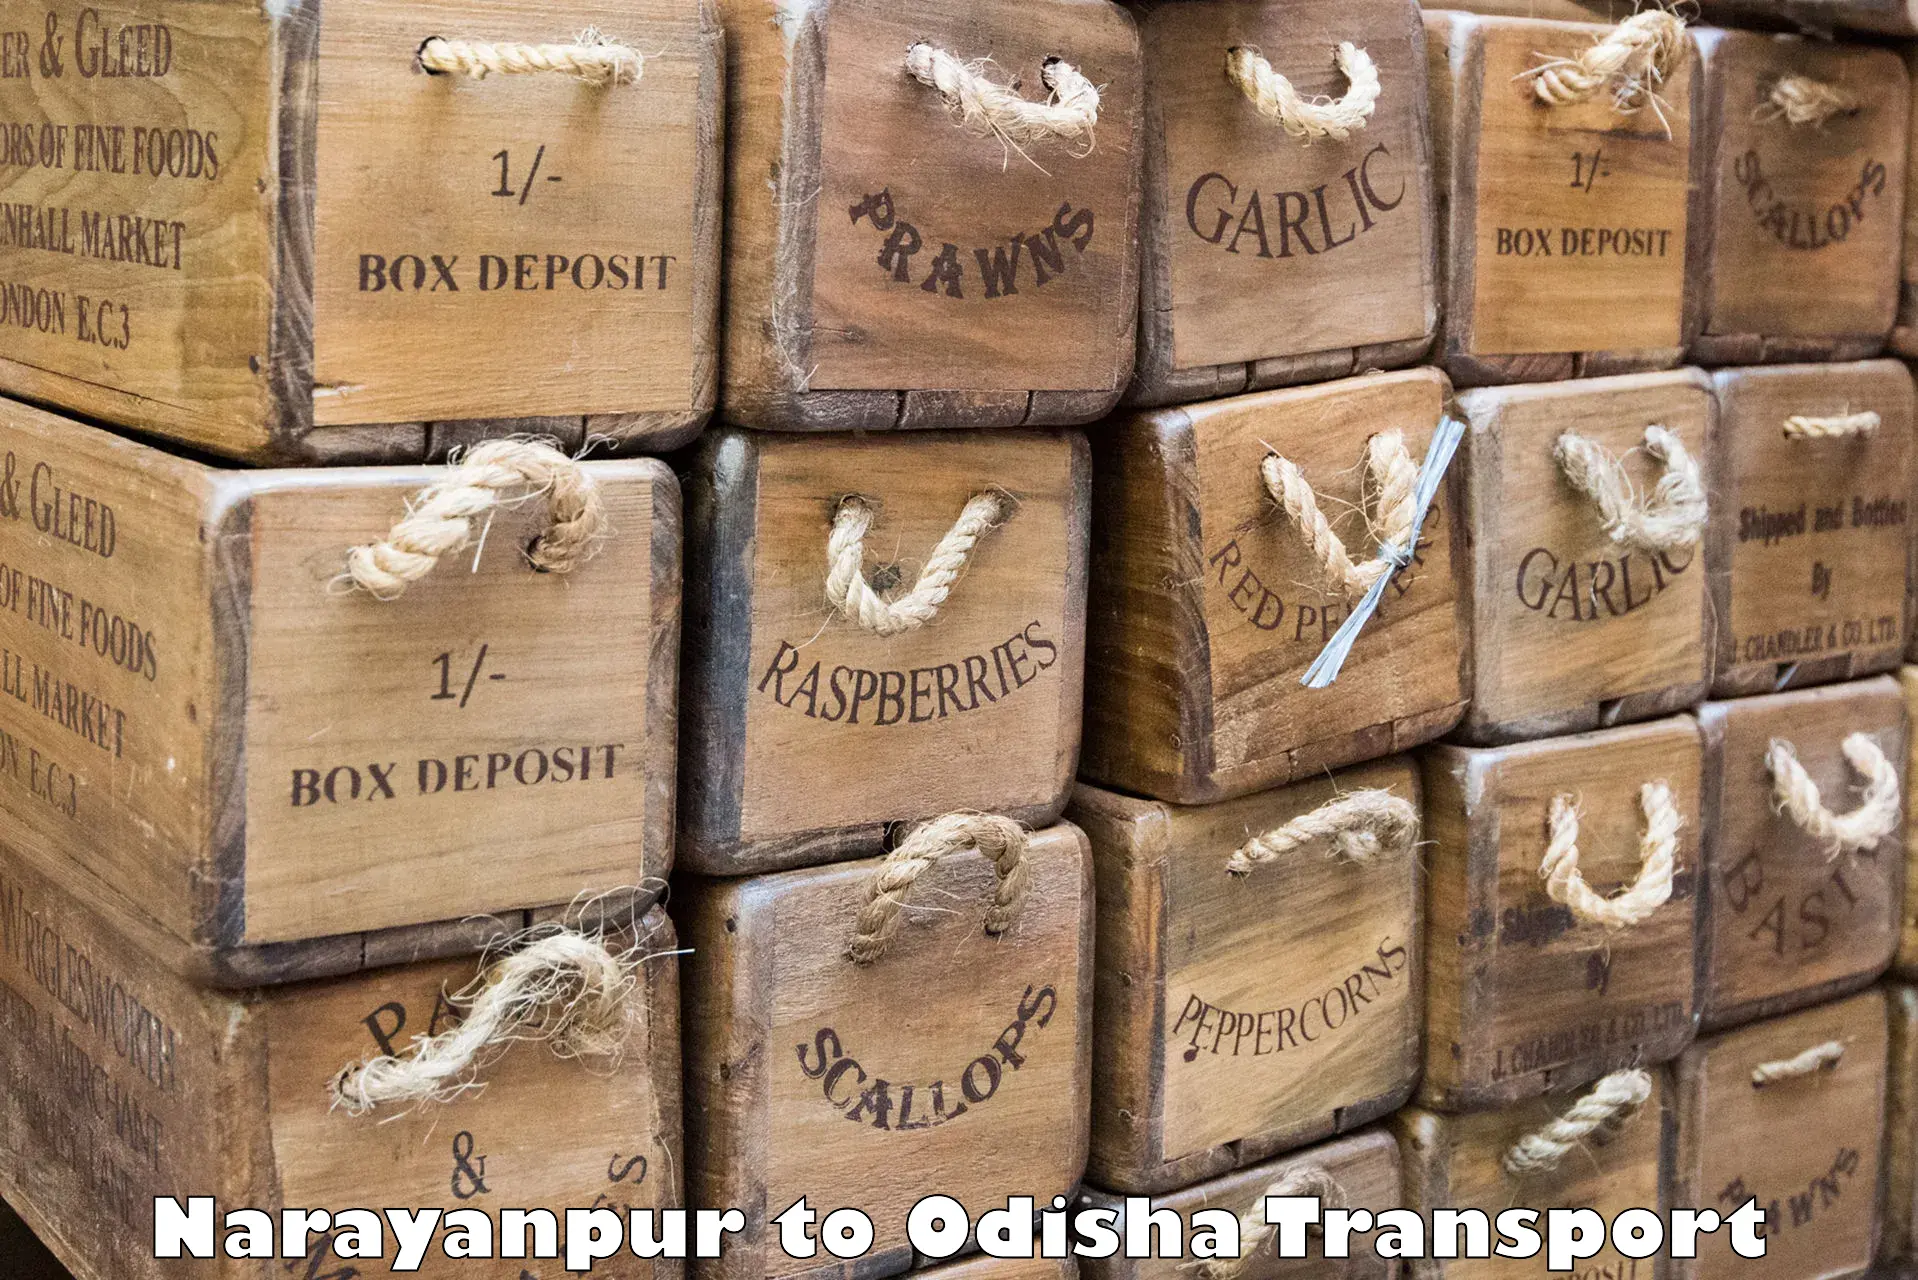 Truck transport companies in India Narayanpur to Sonepur